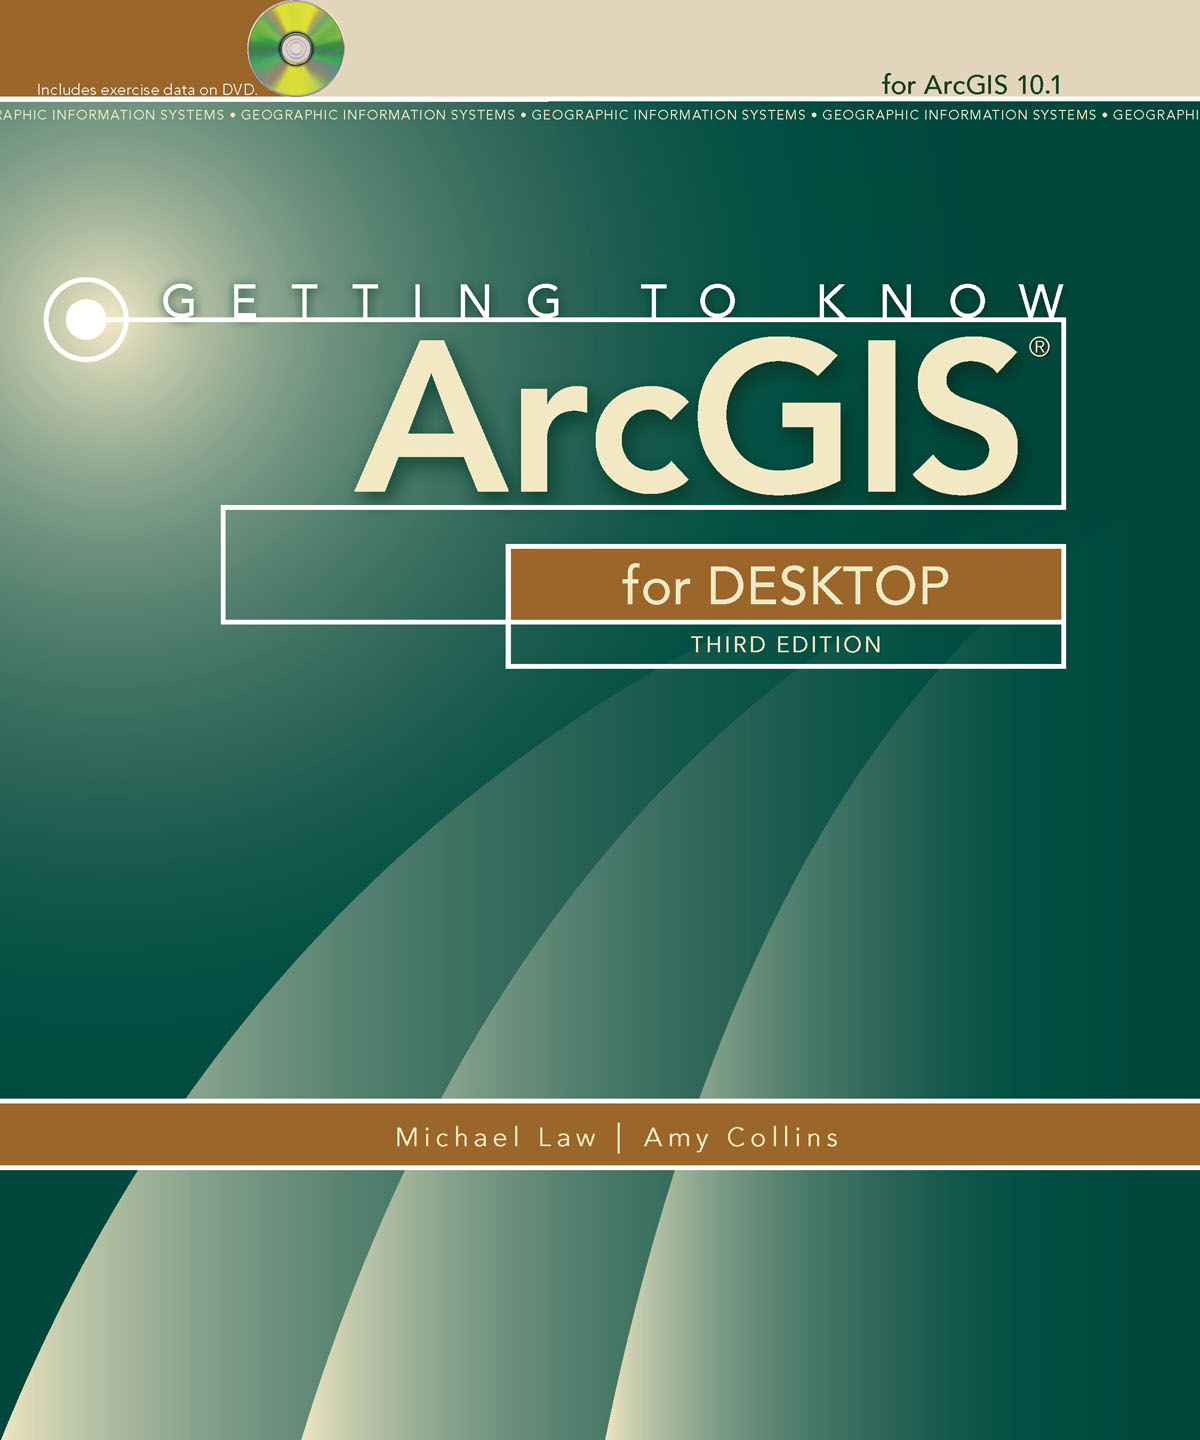 Getting to Know ArcGIS for Desktop, Third Edition, Available